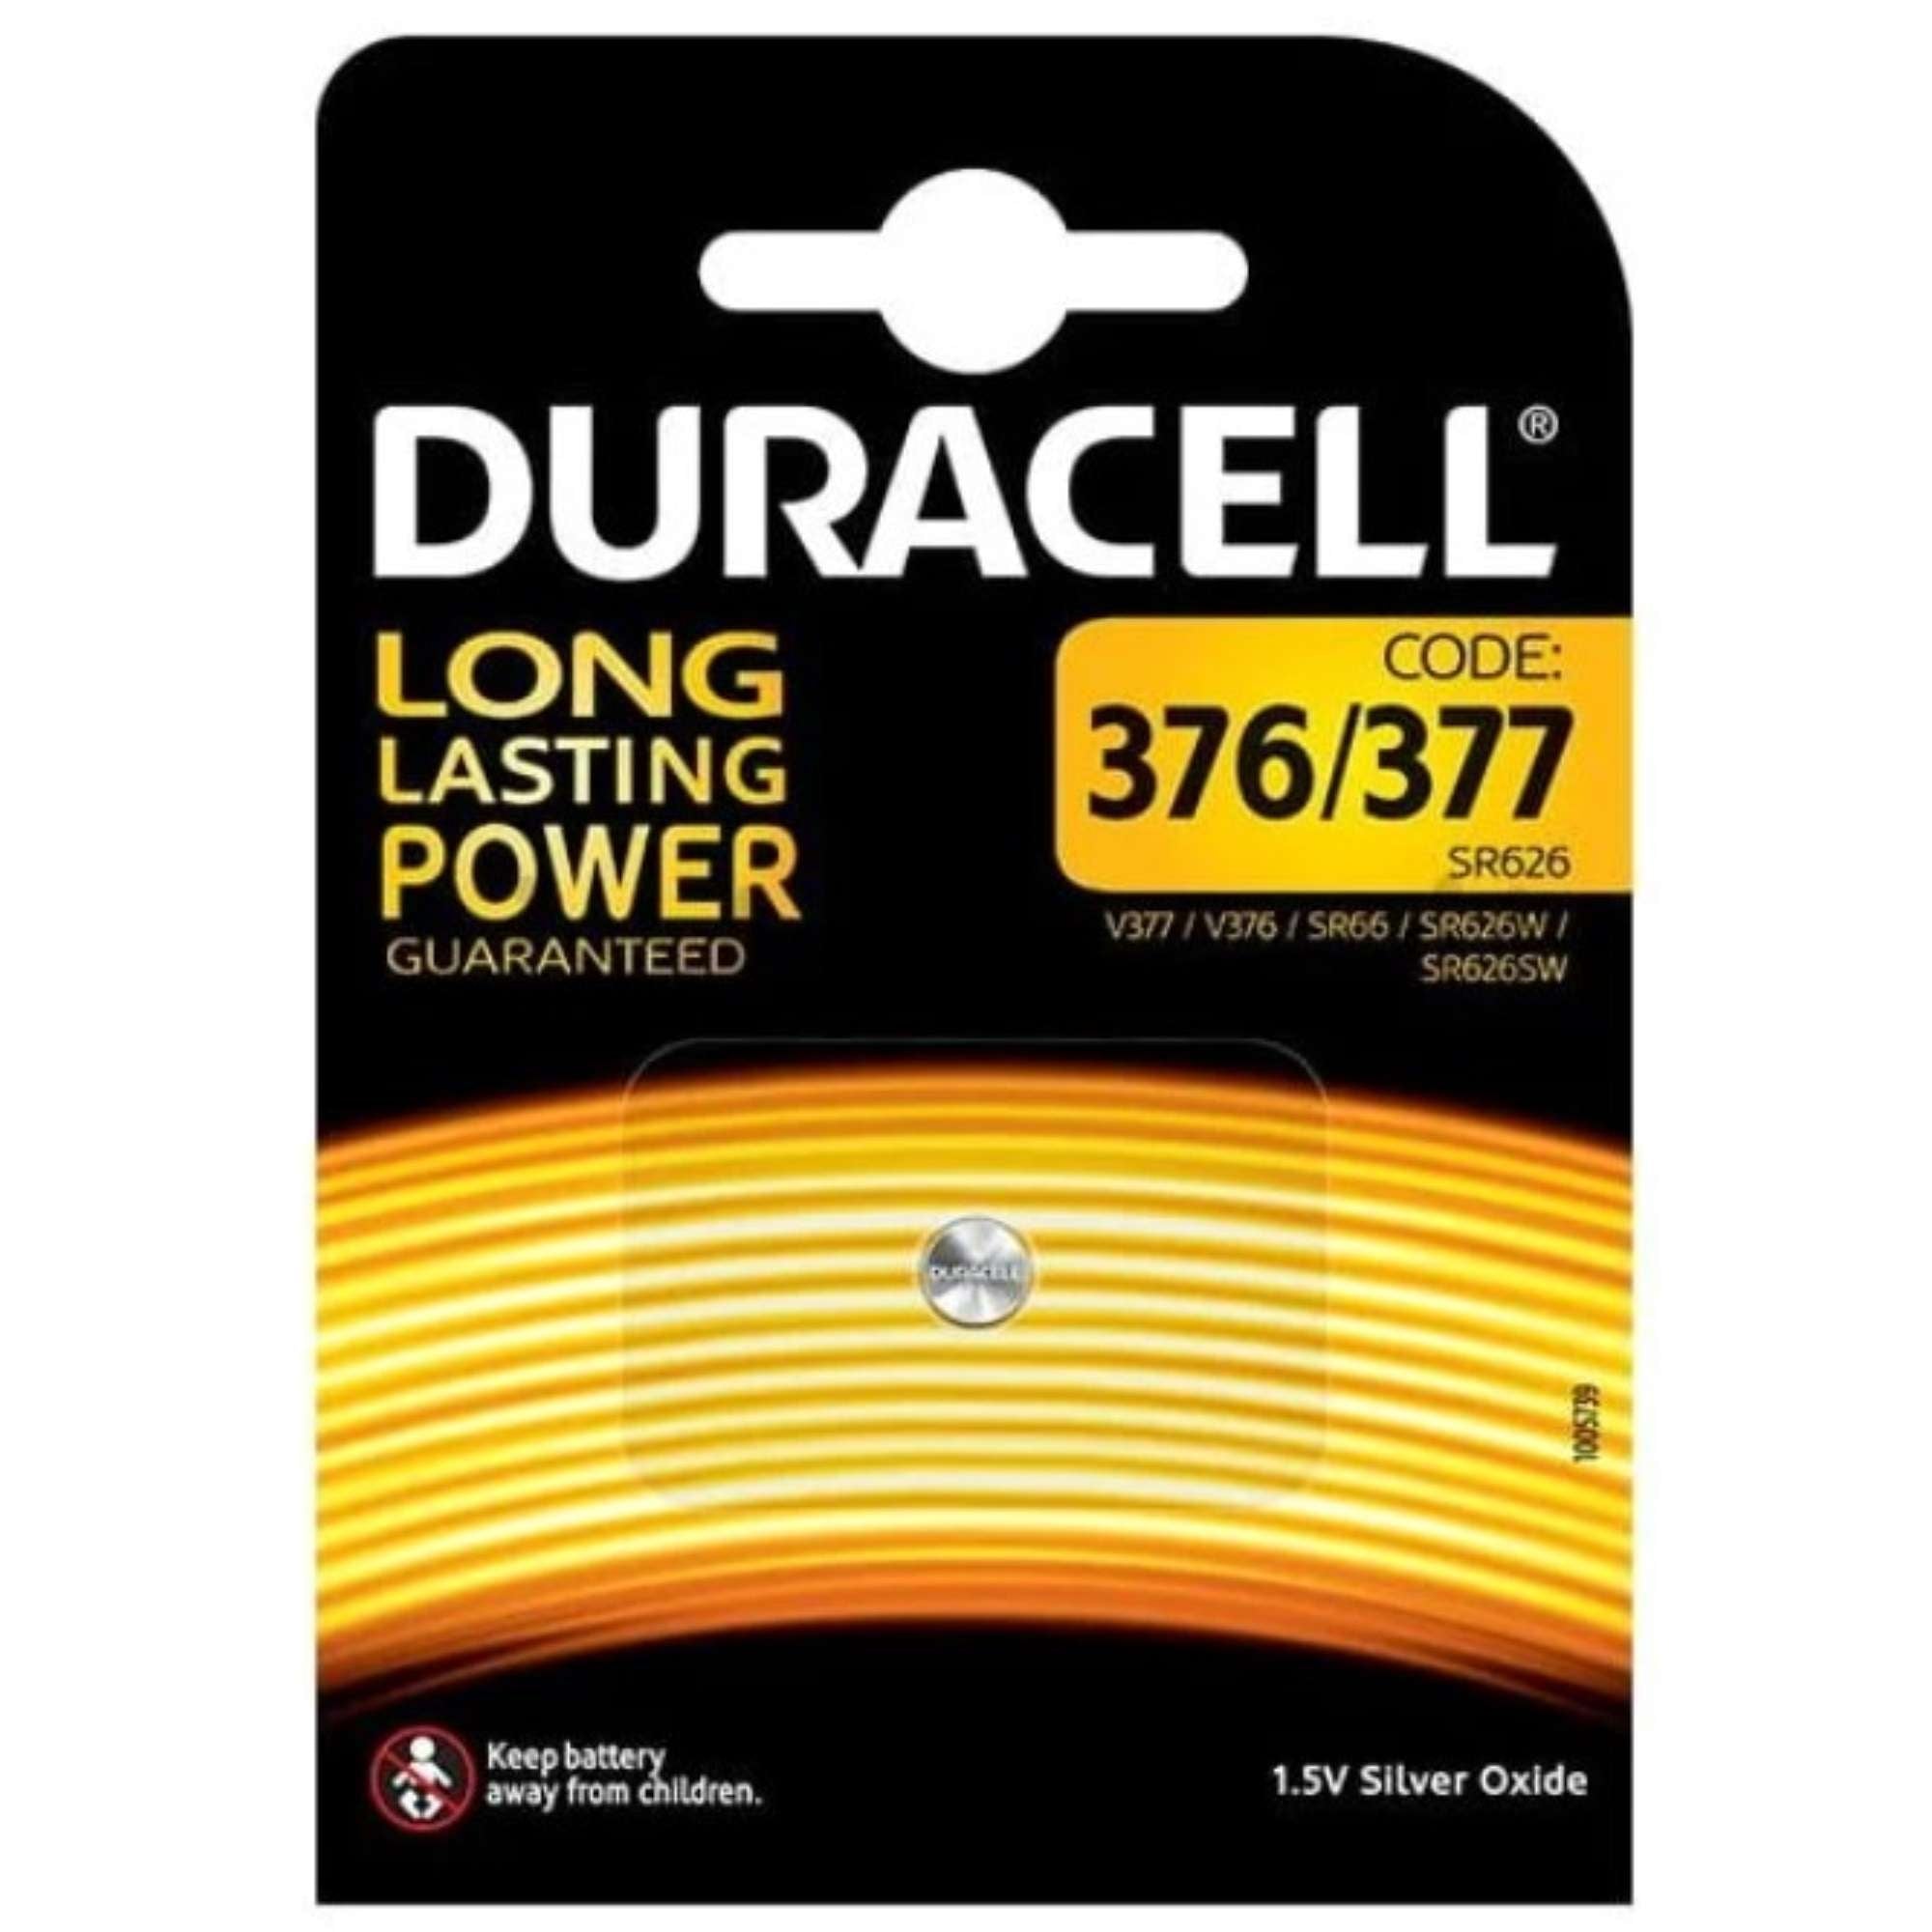 Tablet battery for watches and other electronic devices - DURACELL 376/377